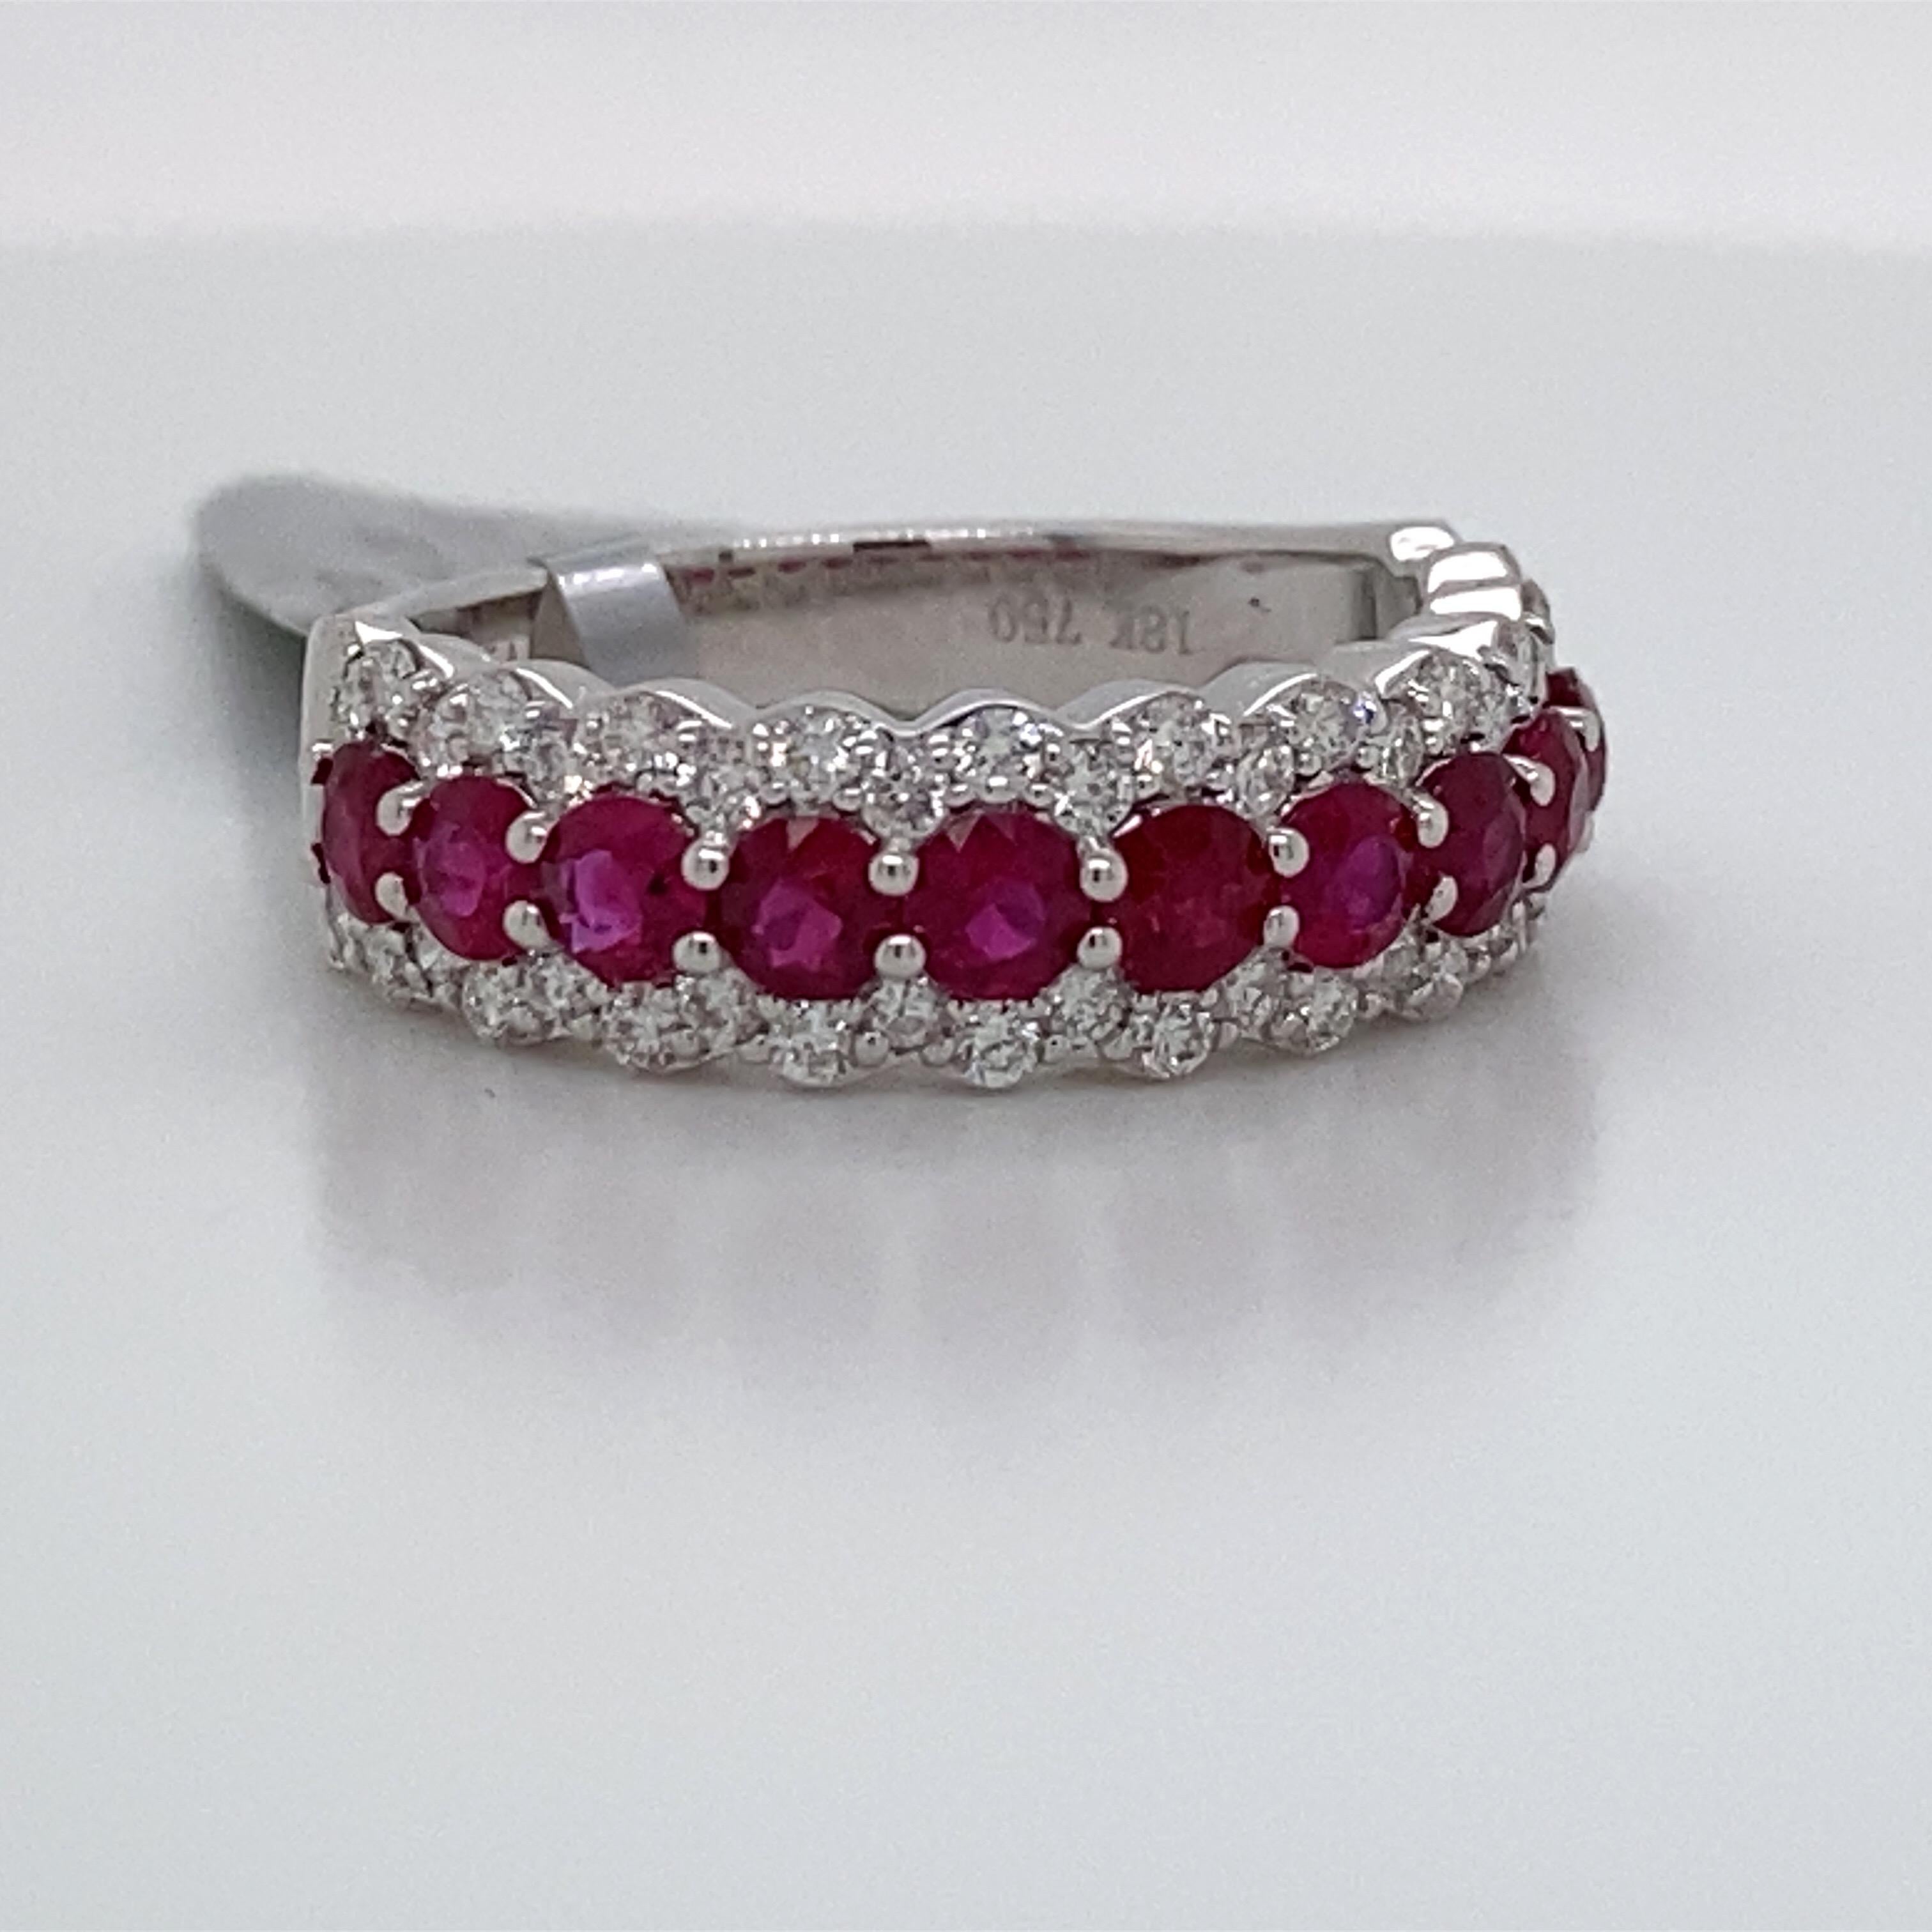 18K White gold band featuring 11 red rubies weighing 1.10 carats surrounded by 50 round brilliants weighing 0.60 carats.
Great for stacking! 
Color G-H
Clarity SI